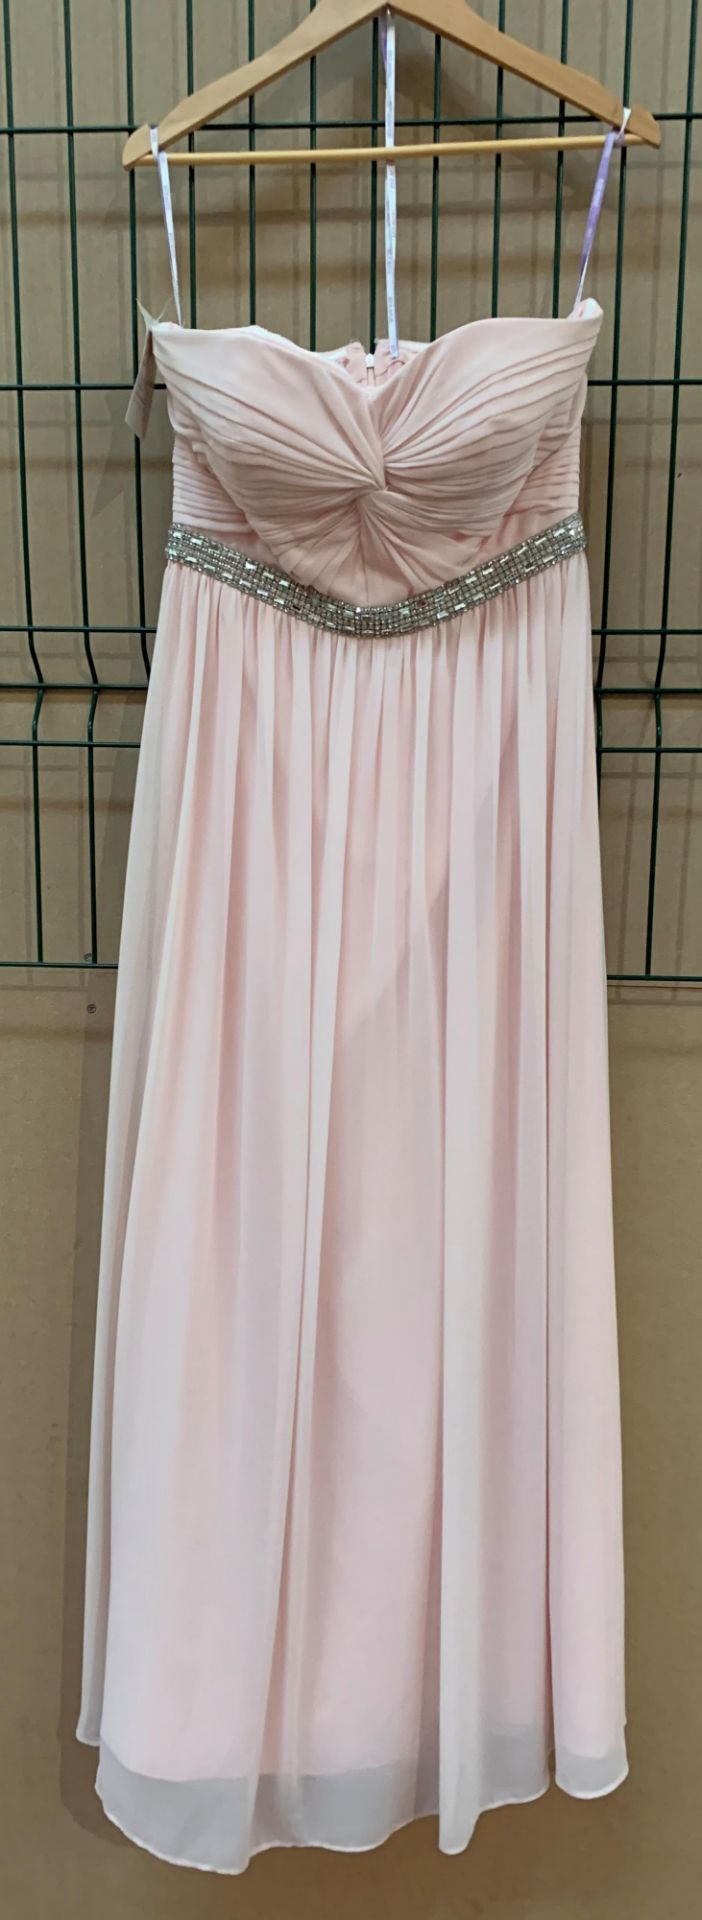 A bridesmaid/prom dress by D'zage, Deltr